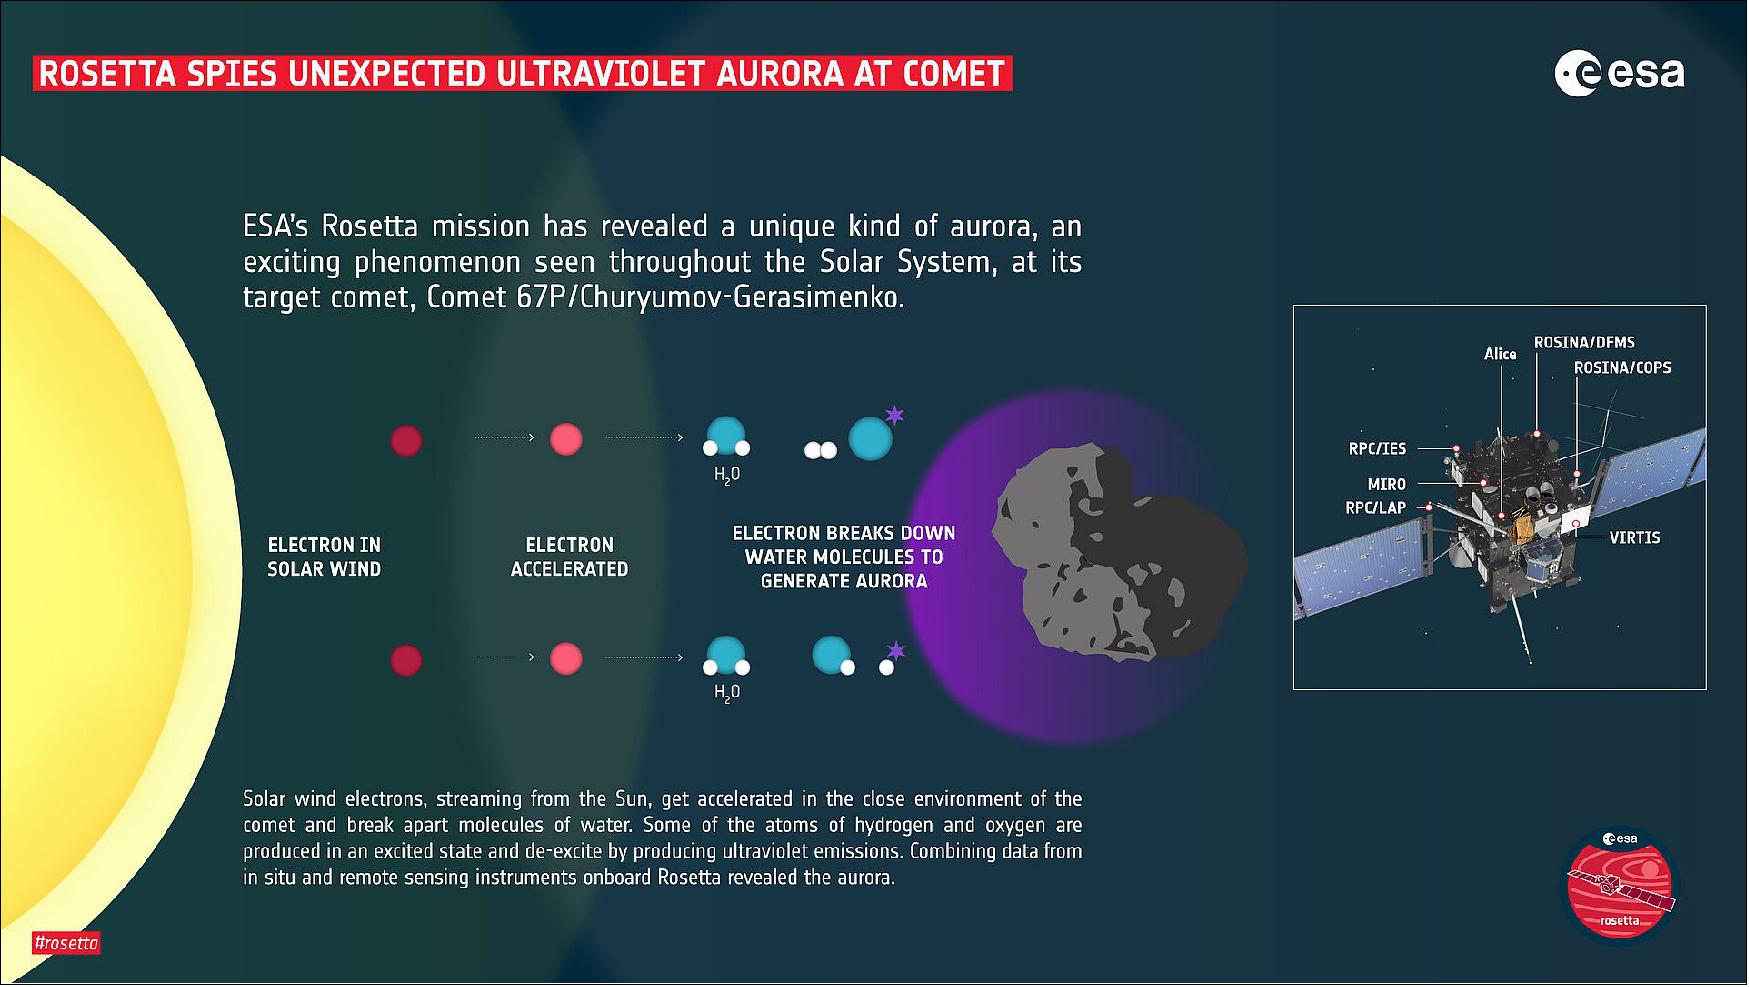 Figure 42: ESA's Rosetta mission has revealed a unique kind of aurora, an exciting phenomenon seen throughout the Solar System, at its target comet, Comet 67P/Churyumov-Gerasimenko. This image shows the key stages of the mechanism by which this aurora is produced: as electrons stream out into space from the Sun and approach the comet, they are accelerated and go on to break down molecules in the comet's environment. This destructive process can throw out excited atoms, which then ‘de-excite' to produce the observed aurora. To reveal the auroral nature of the emissions, the study relies on a set of in situ and remote-sensing instruments aboard Rosetta (RPC, Rosina, Virtis, Miro and Alice), as shown to the right of the infographic in the spacecraft schematic [image credit: ESA (spacecraft: ESA/ATG medialab)]